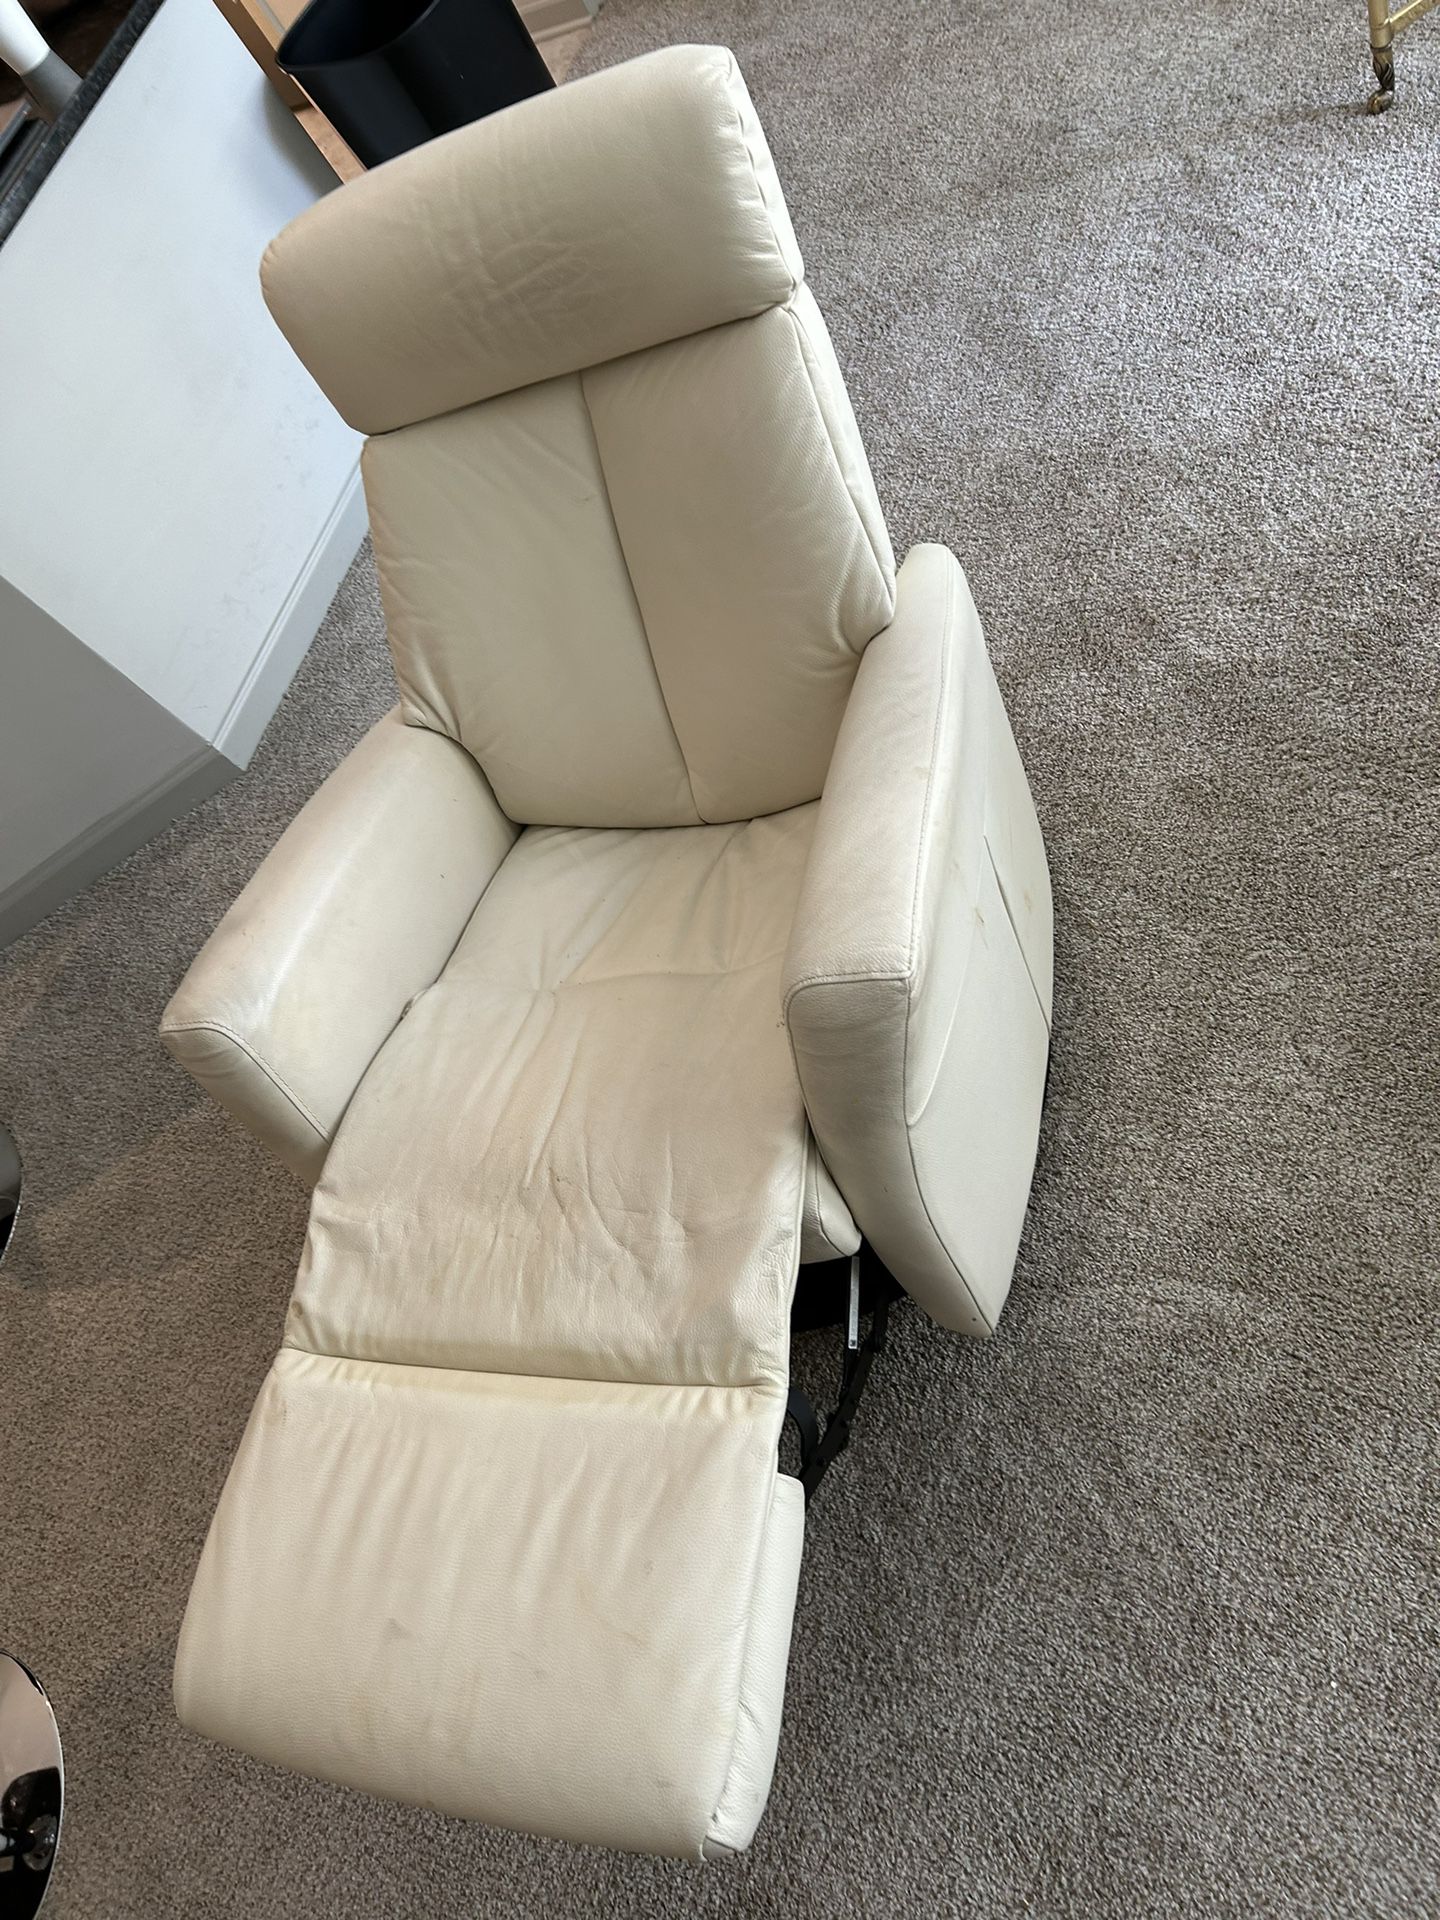 Modern Recliner, Leather Chair